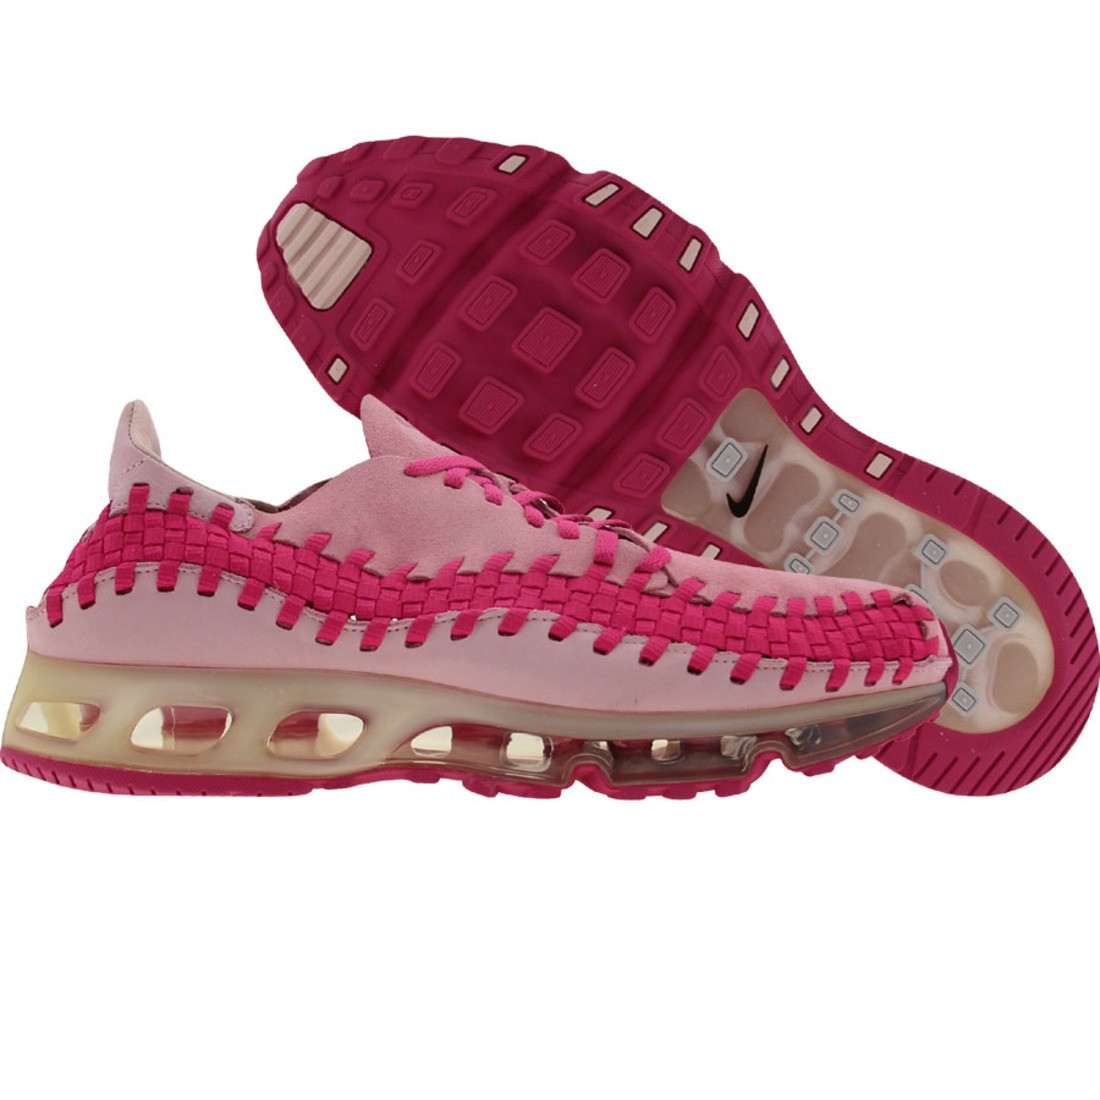 Nike Air Footscape Woven 360 Tier 0 Zero 2007 Year of the Pig Edition (morning glory / perfect pink / punch)